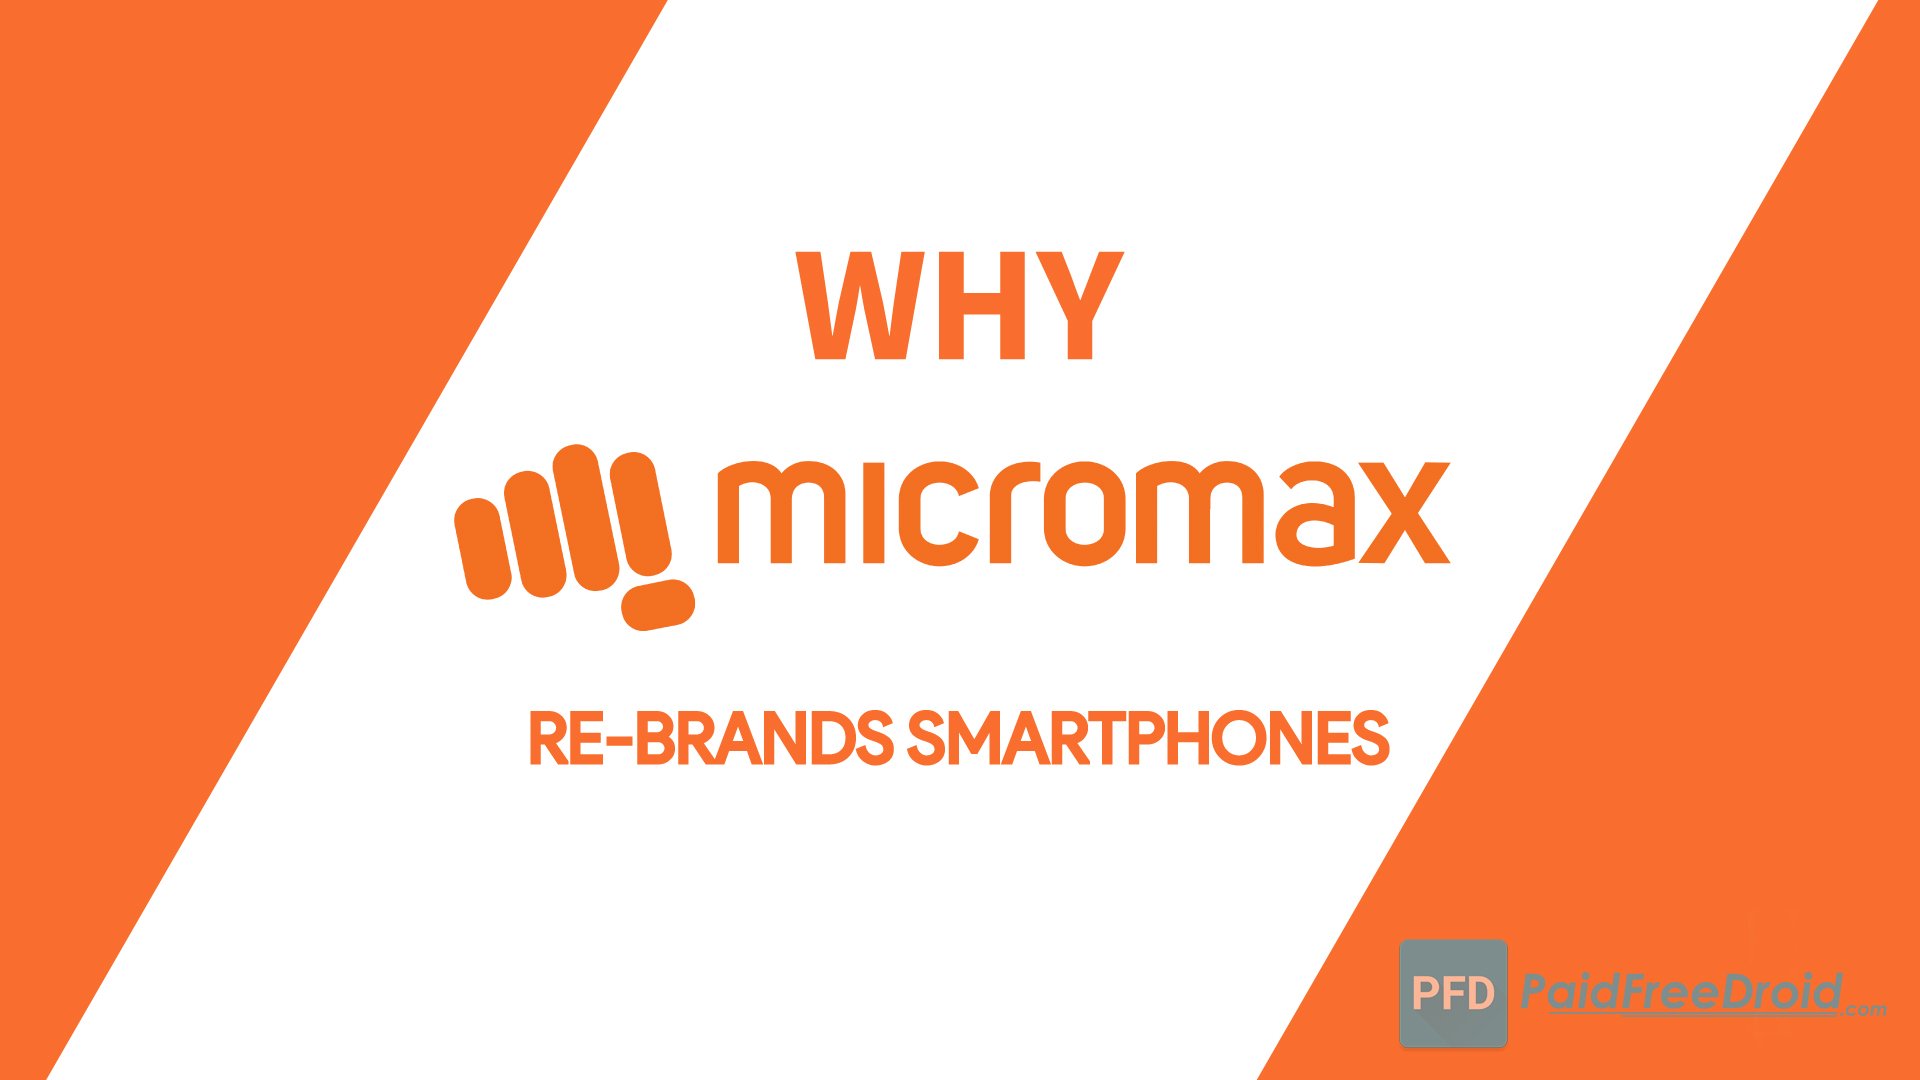 Why Micromax Re-Brands Smartphones?